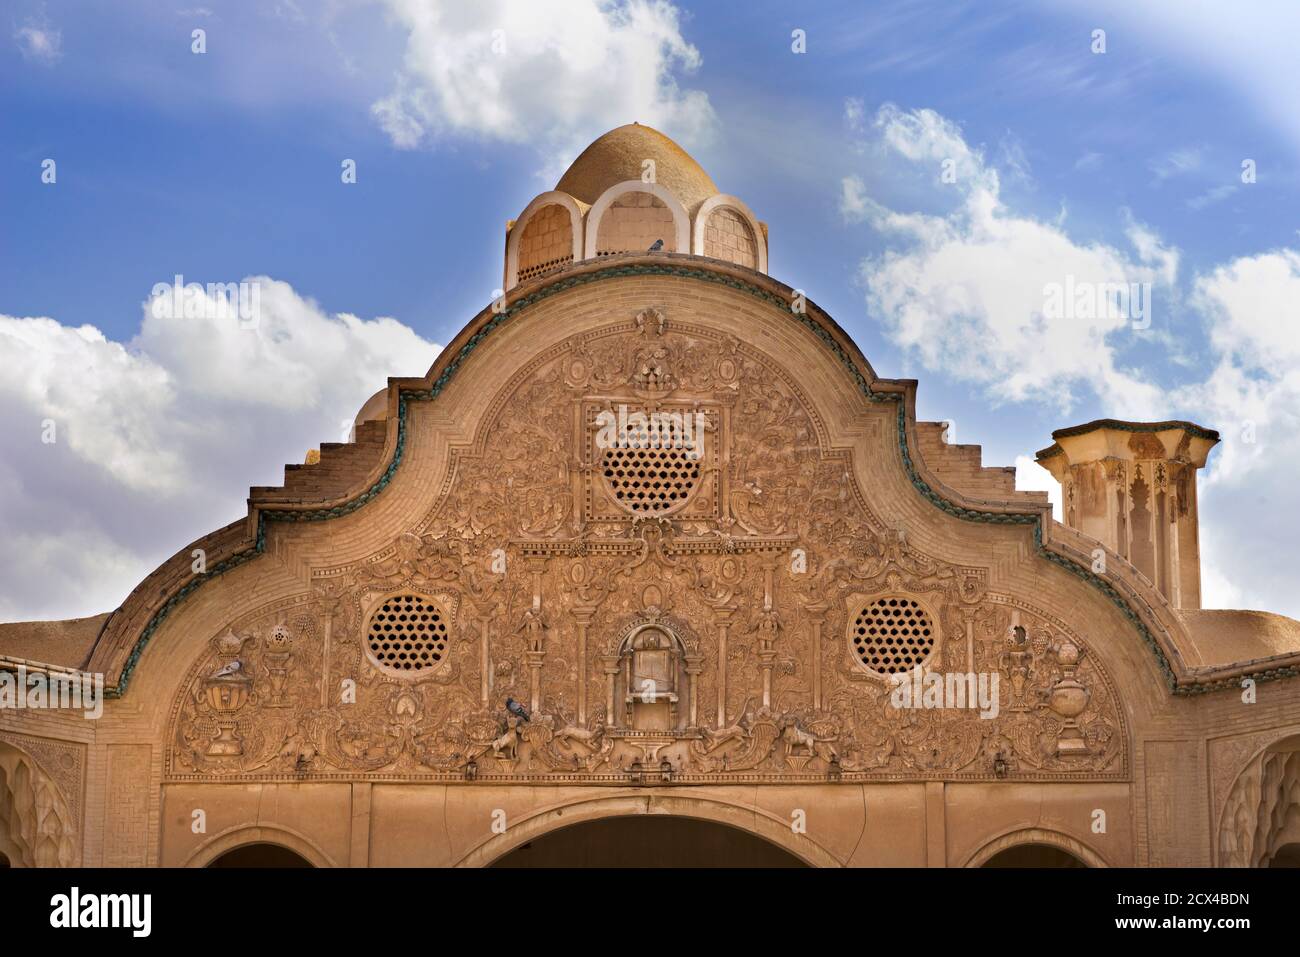 Ornate architecture of the Borujerdi historical house, Kashan, Iran. The house was built in 1857  by architect Ustad Ali Maryam, for the wife of Seyyed Mehdi Borujerdi, a wealthy merchant. Stock Photo